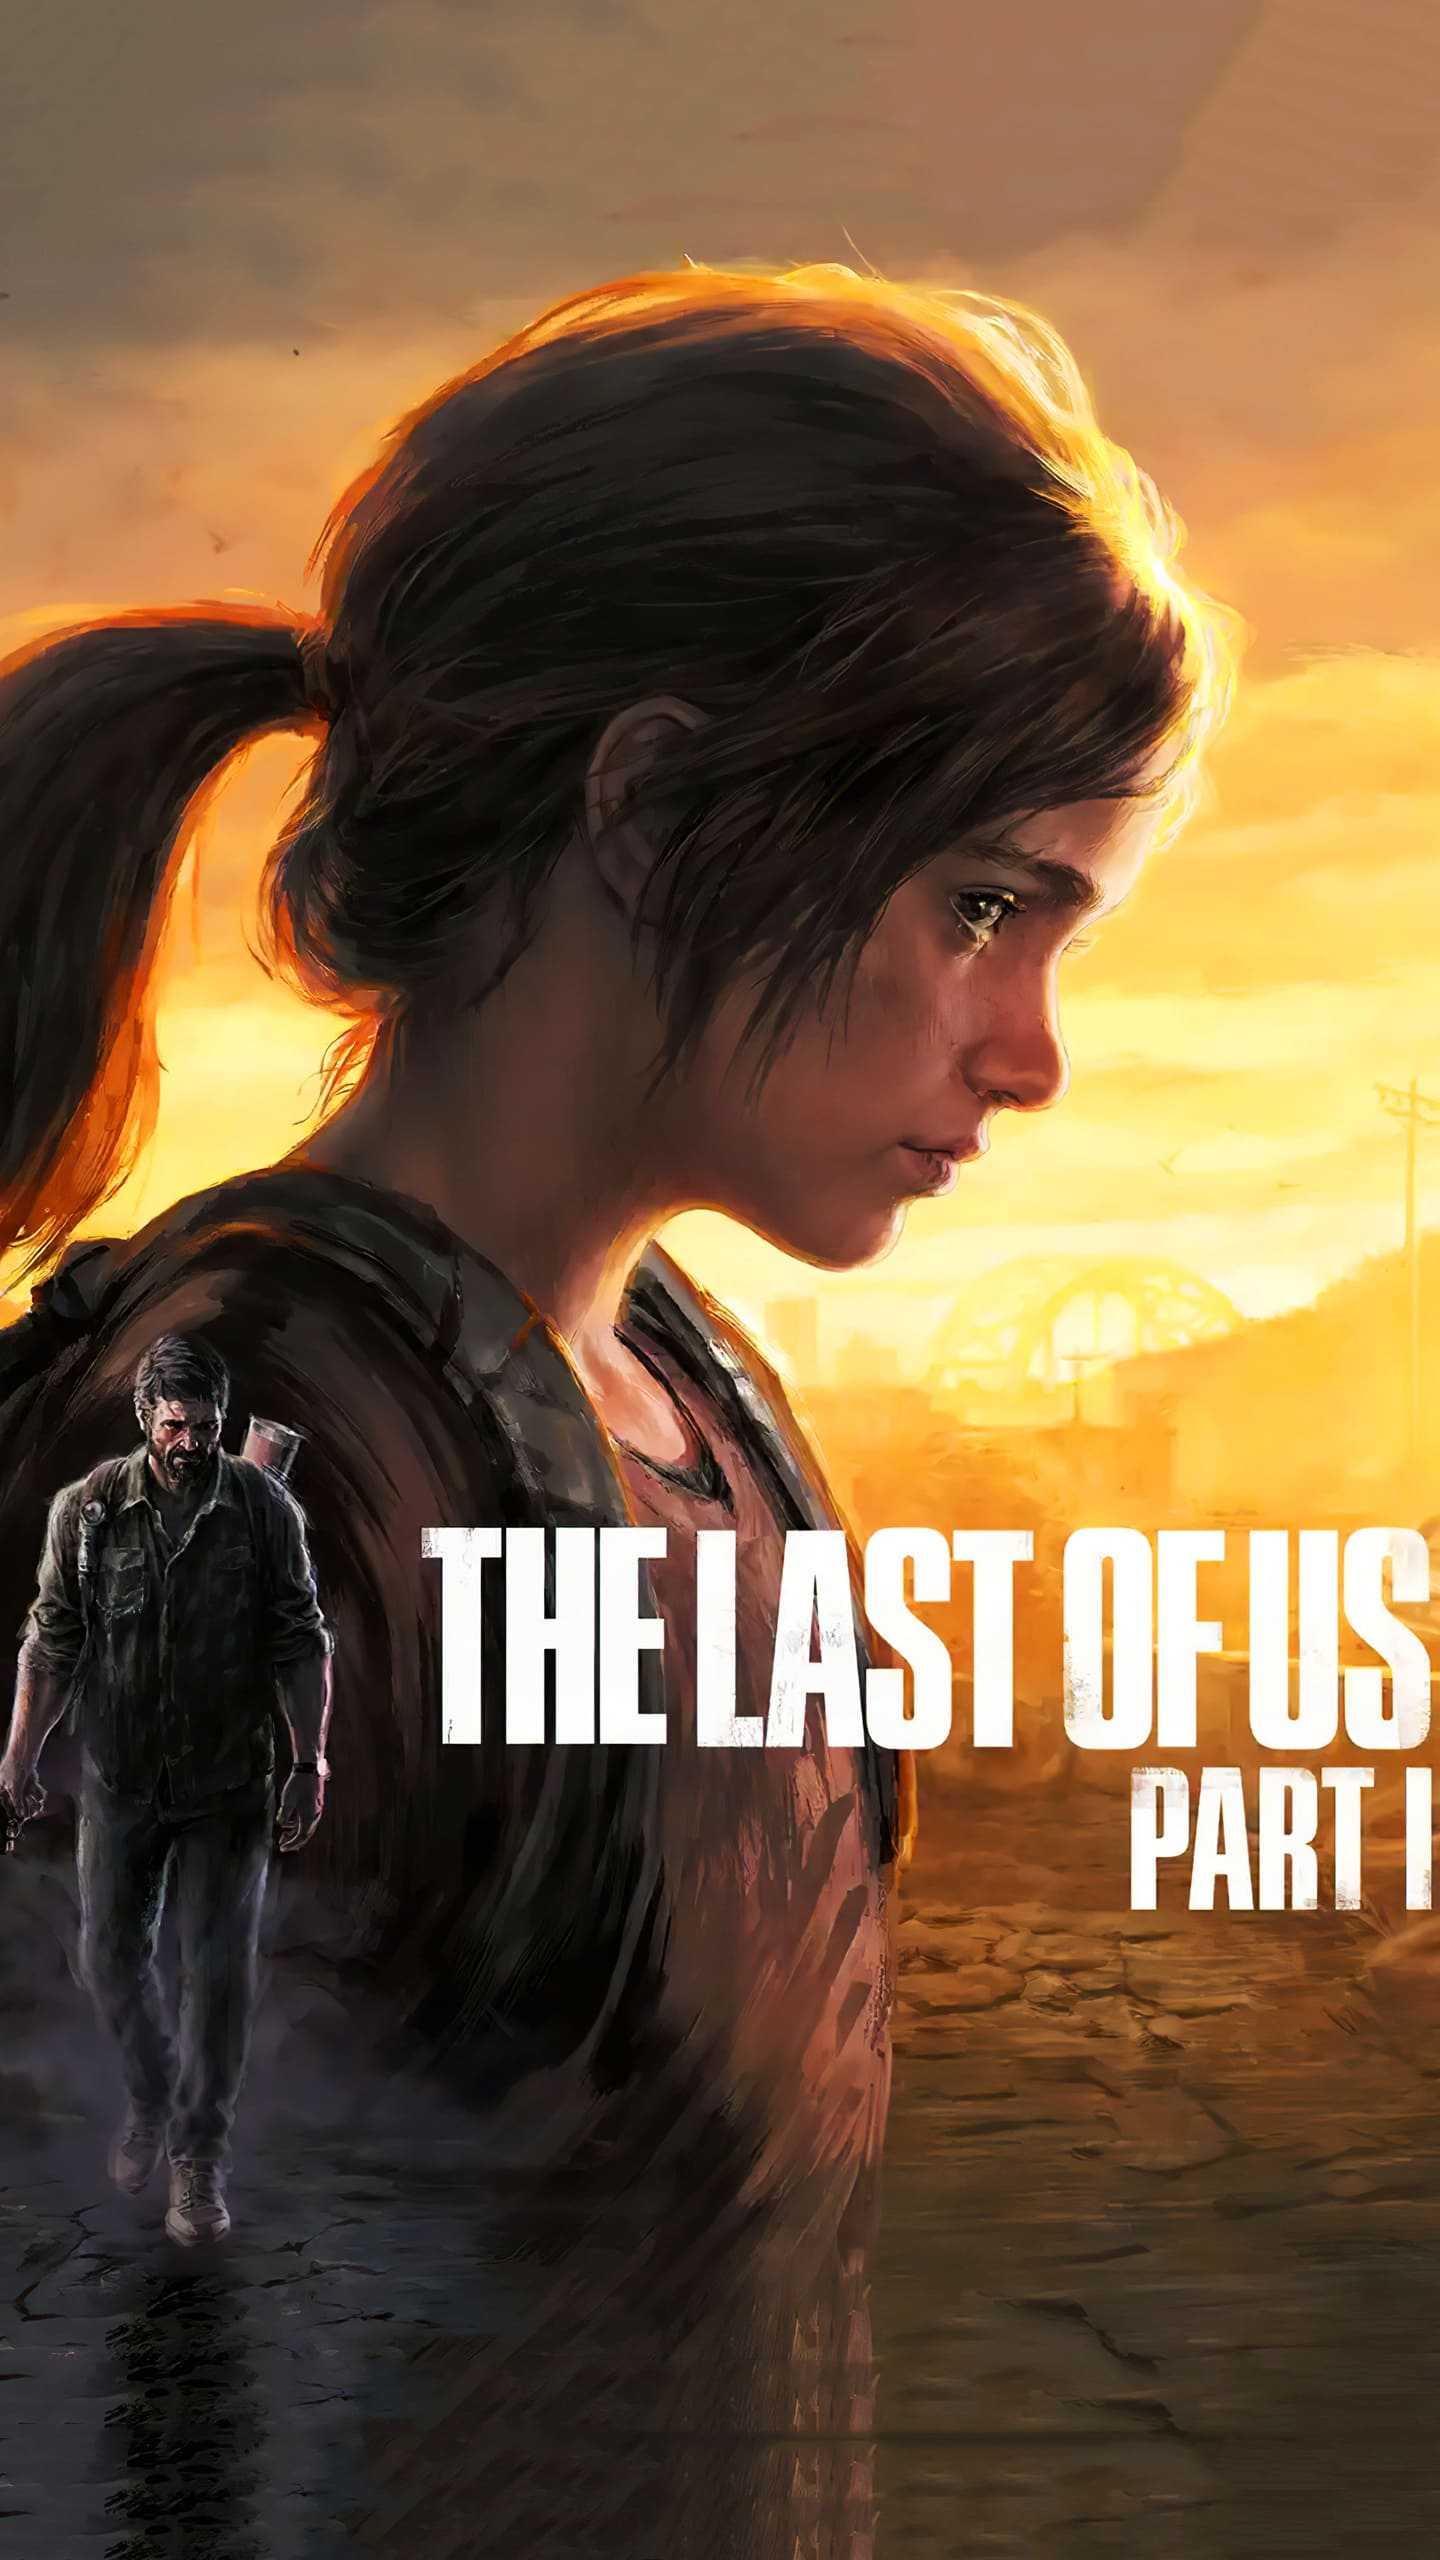 Last of us part 1 steam фото 68